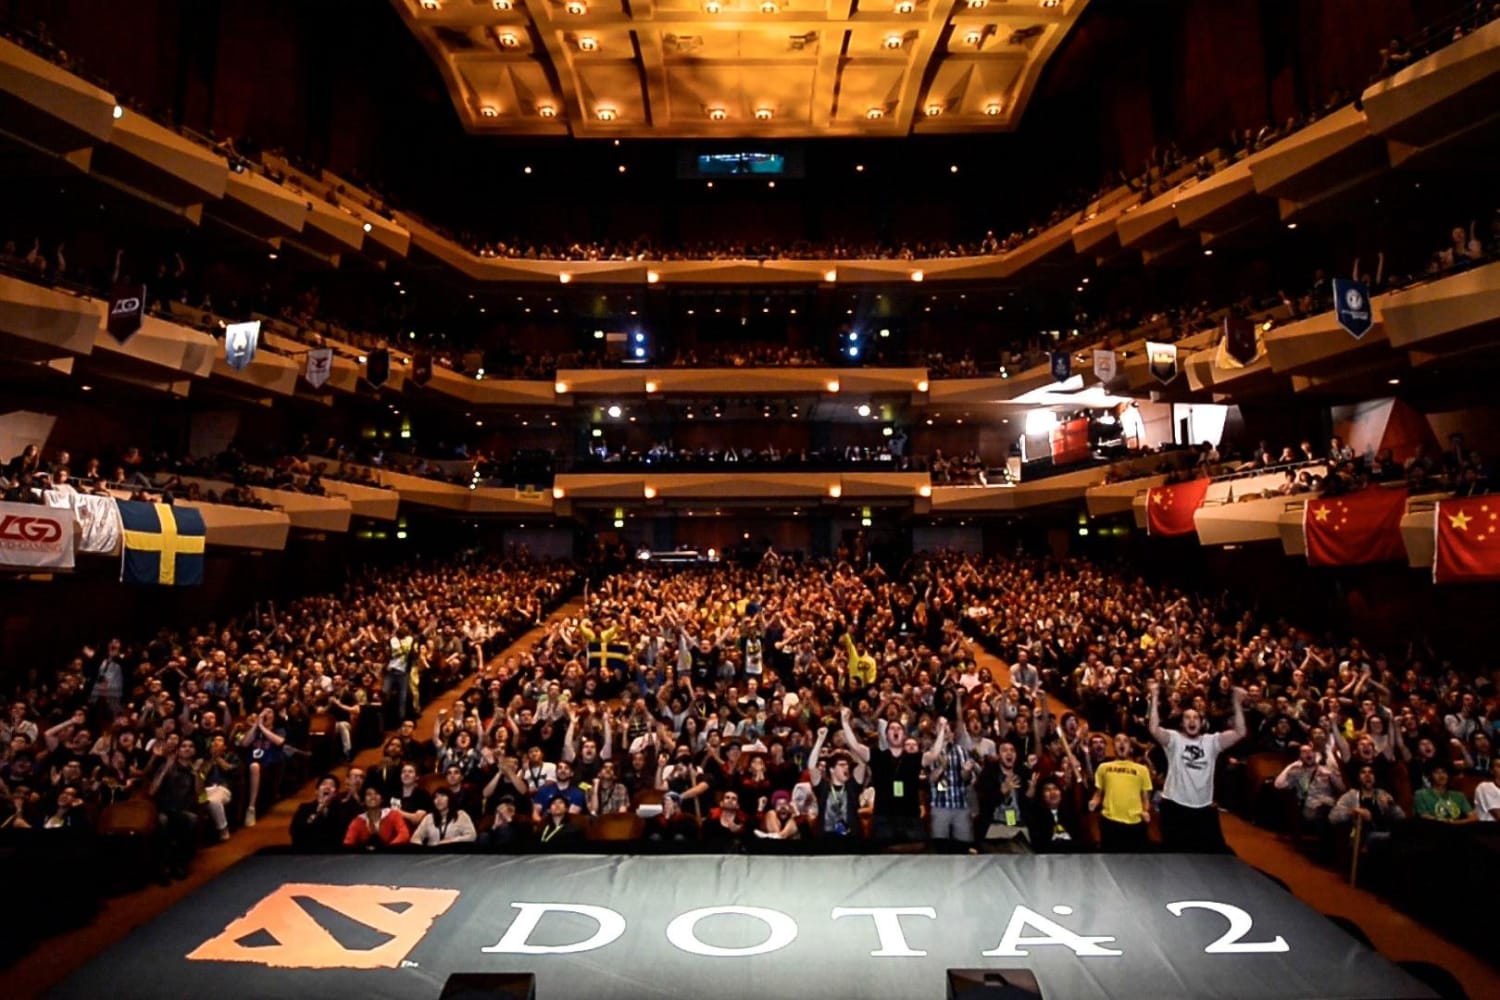 Dota 2 - Free to Play - A Documentary by Valve Watch the full